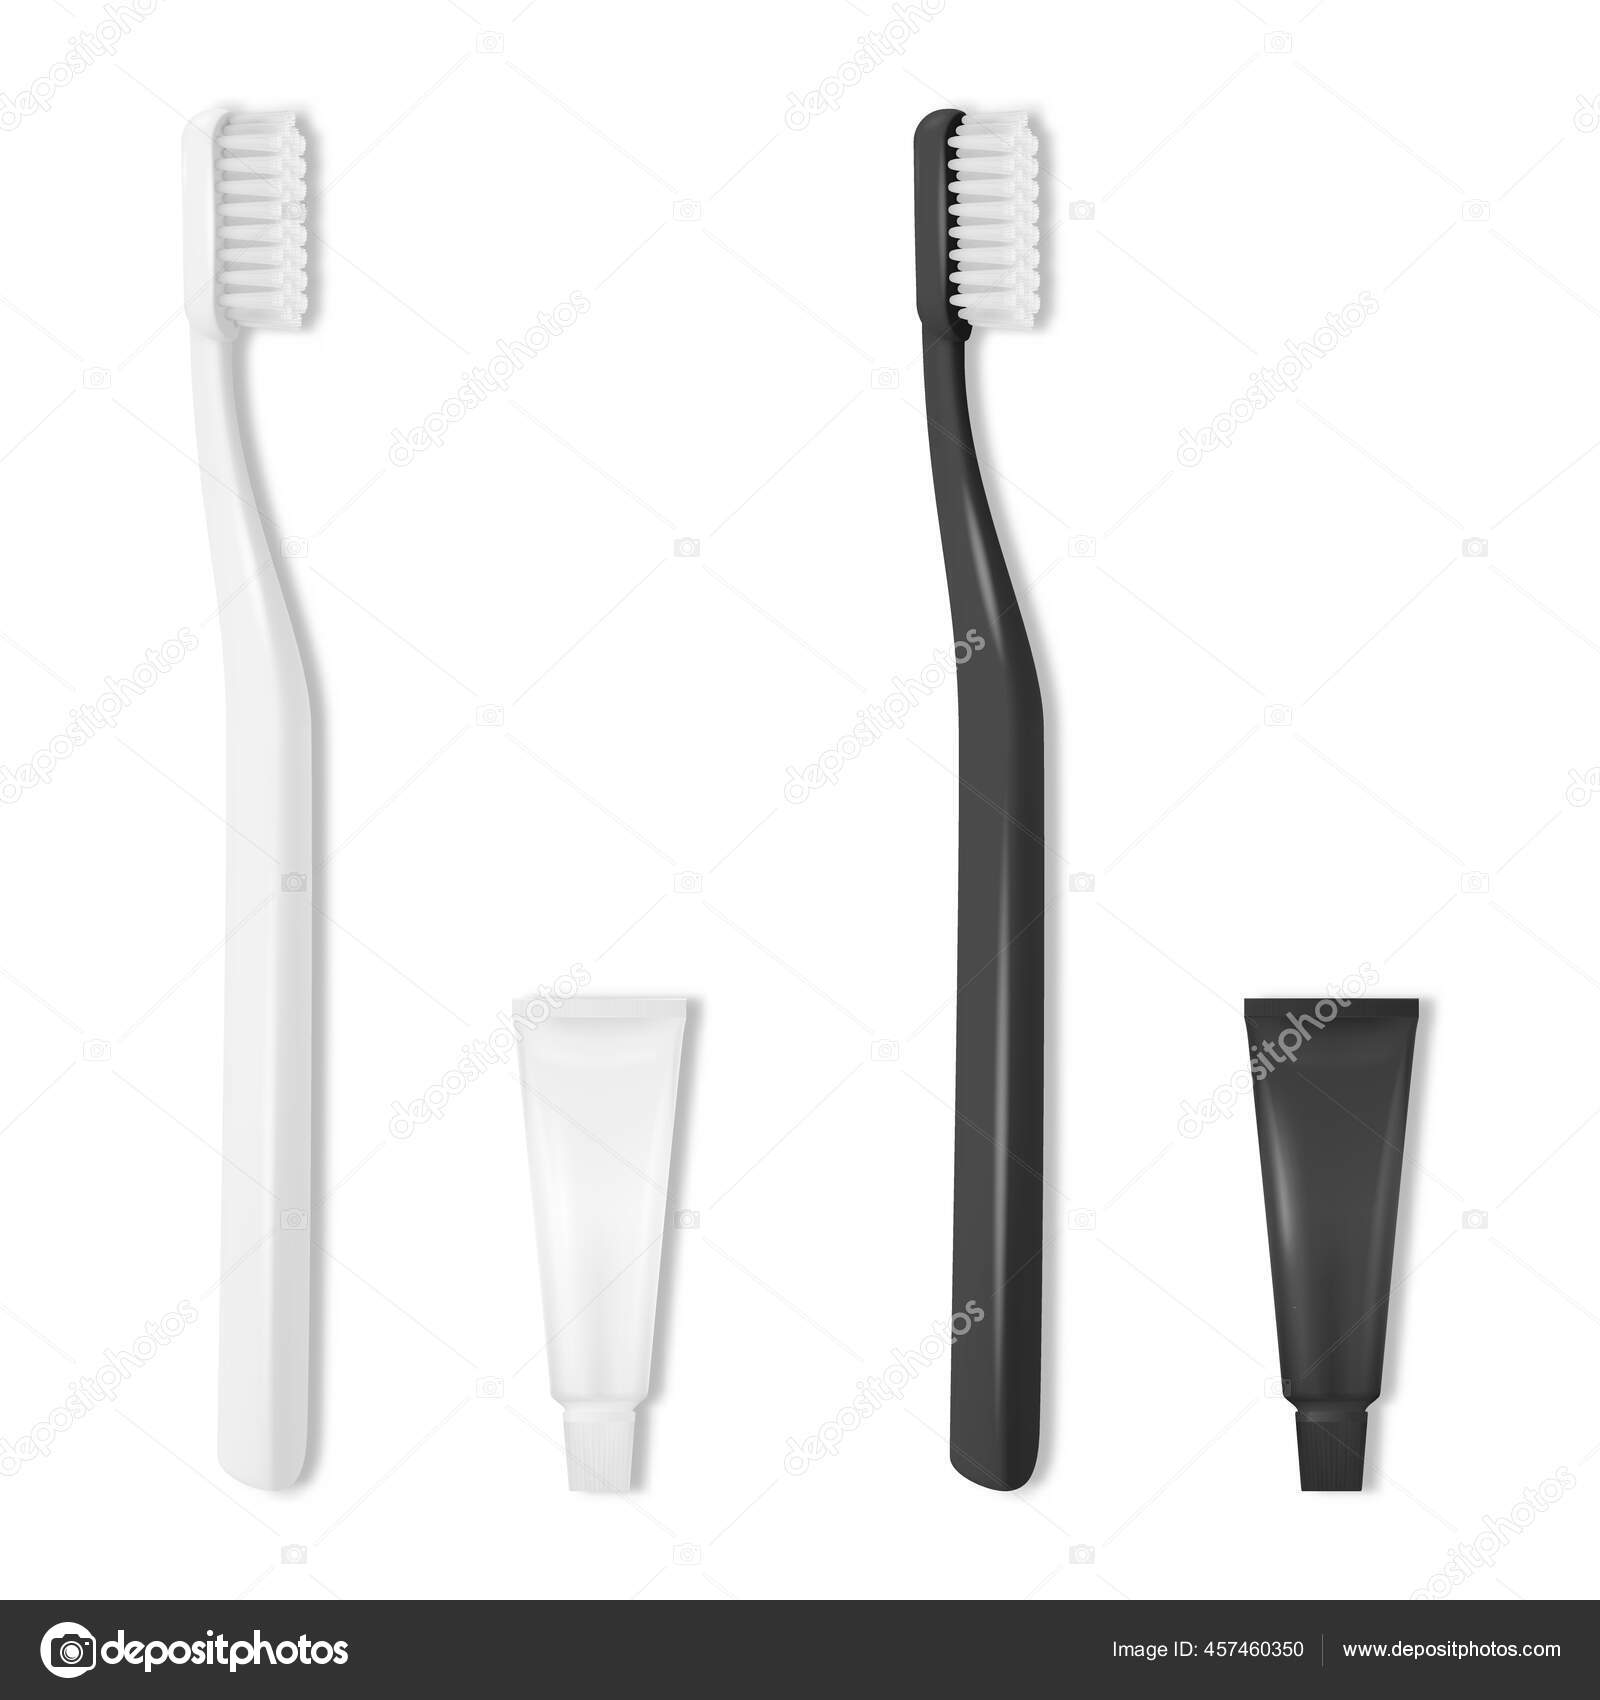 Download Vector 3d Realistic White And Black Hotel Plastic Blank Toothbrush And Tooth Paste Tube Set Isolated On White Design Template Mockup Dentistry Healthcare Hygiene Concept Tooth Brush Top View Vector Image